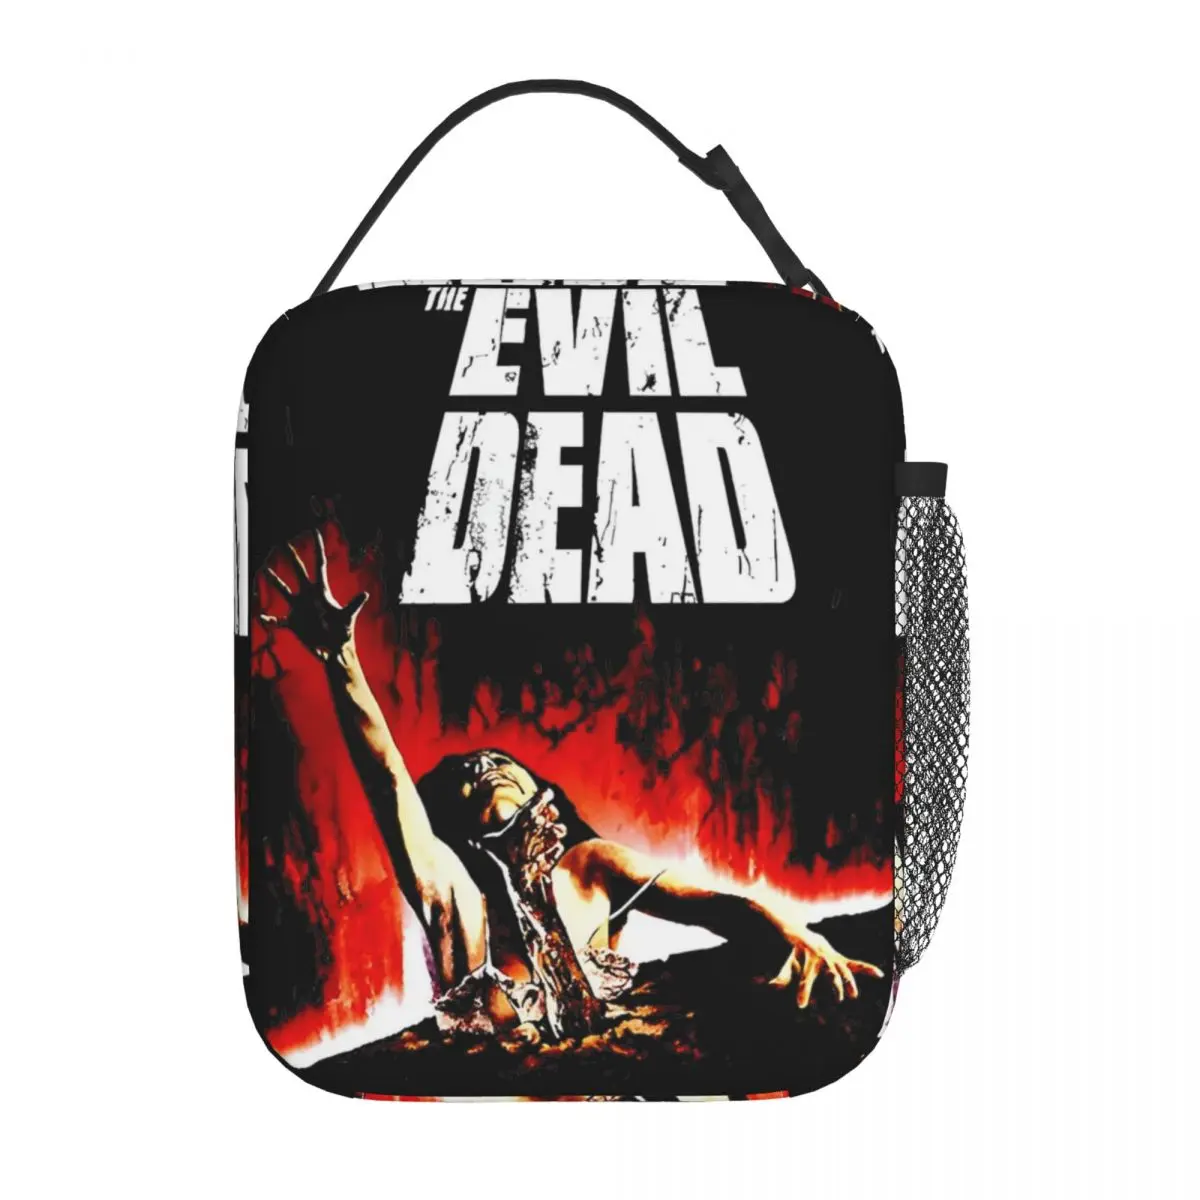 

Lunch Box The Evil Dead Horror Movie Merch Storage Food Box New Thermal Cooler Lunch Box For Work